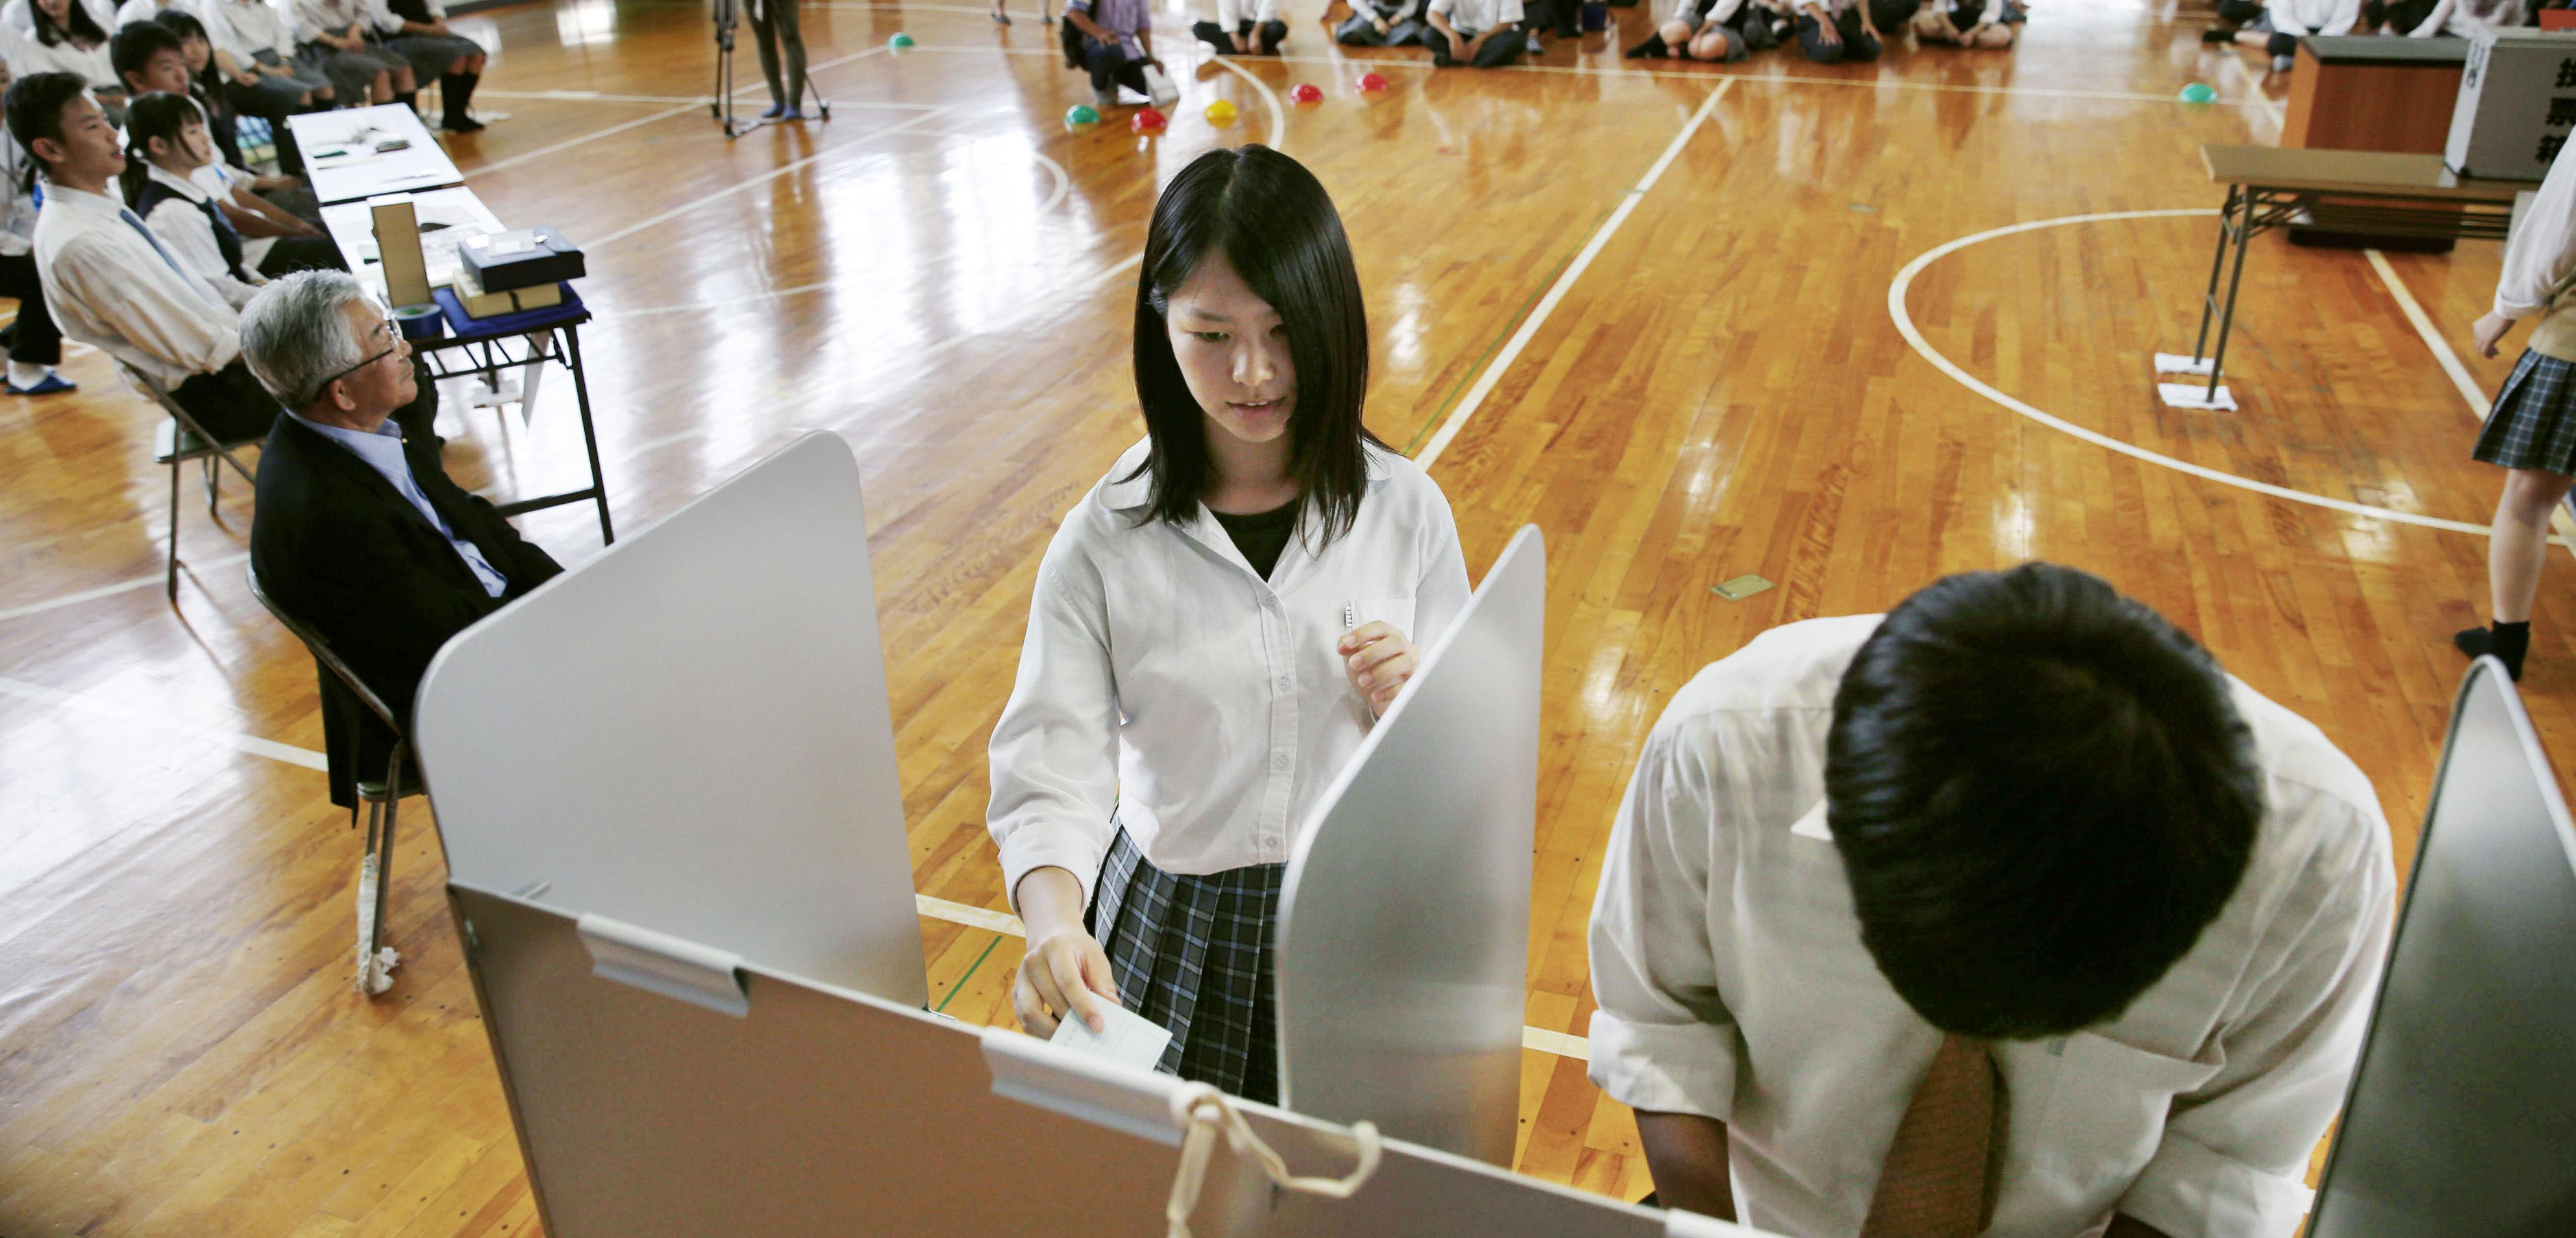 High school students practice voting on June 15 in Hino, Shiga Prefecture, which will hold a mayoral election on July 3. | KYODO